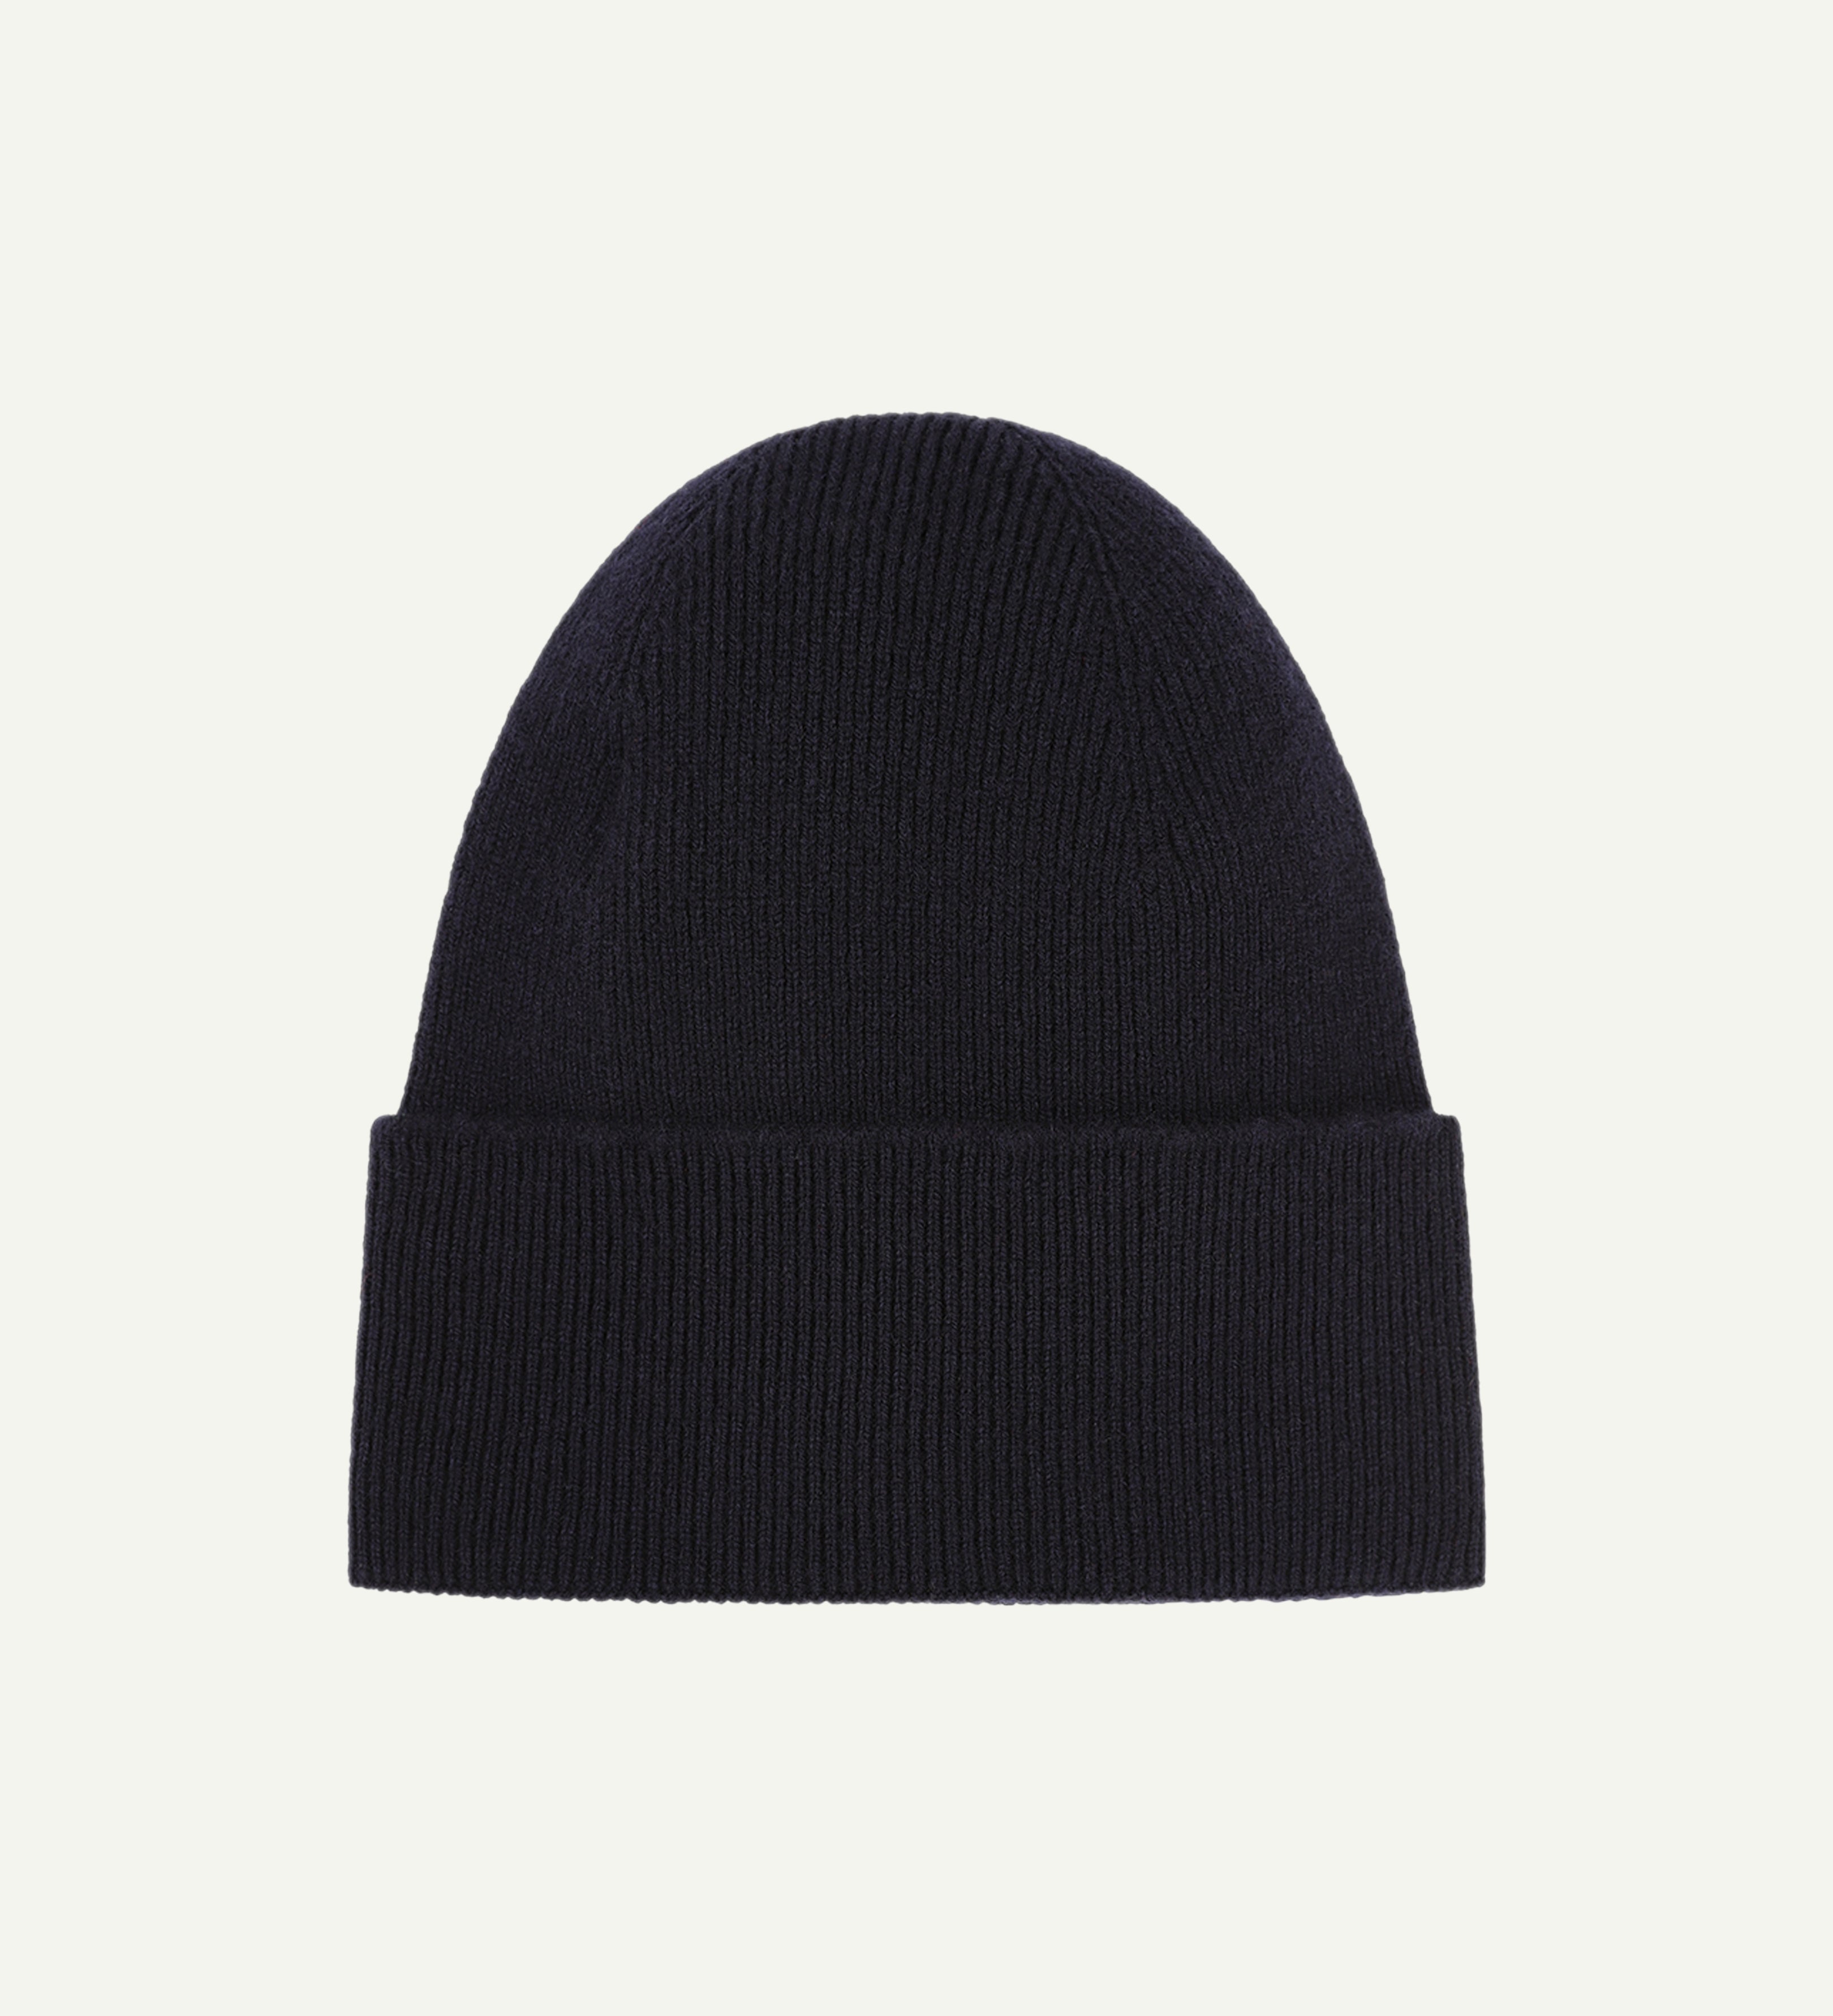 Flat view of Uskees 4004 navy blue wool hat, showing a clear view of the adjustable cuff and the ribbed texture of the hat.